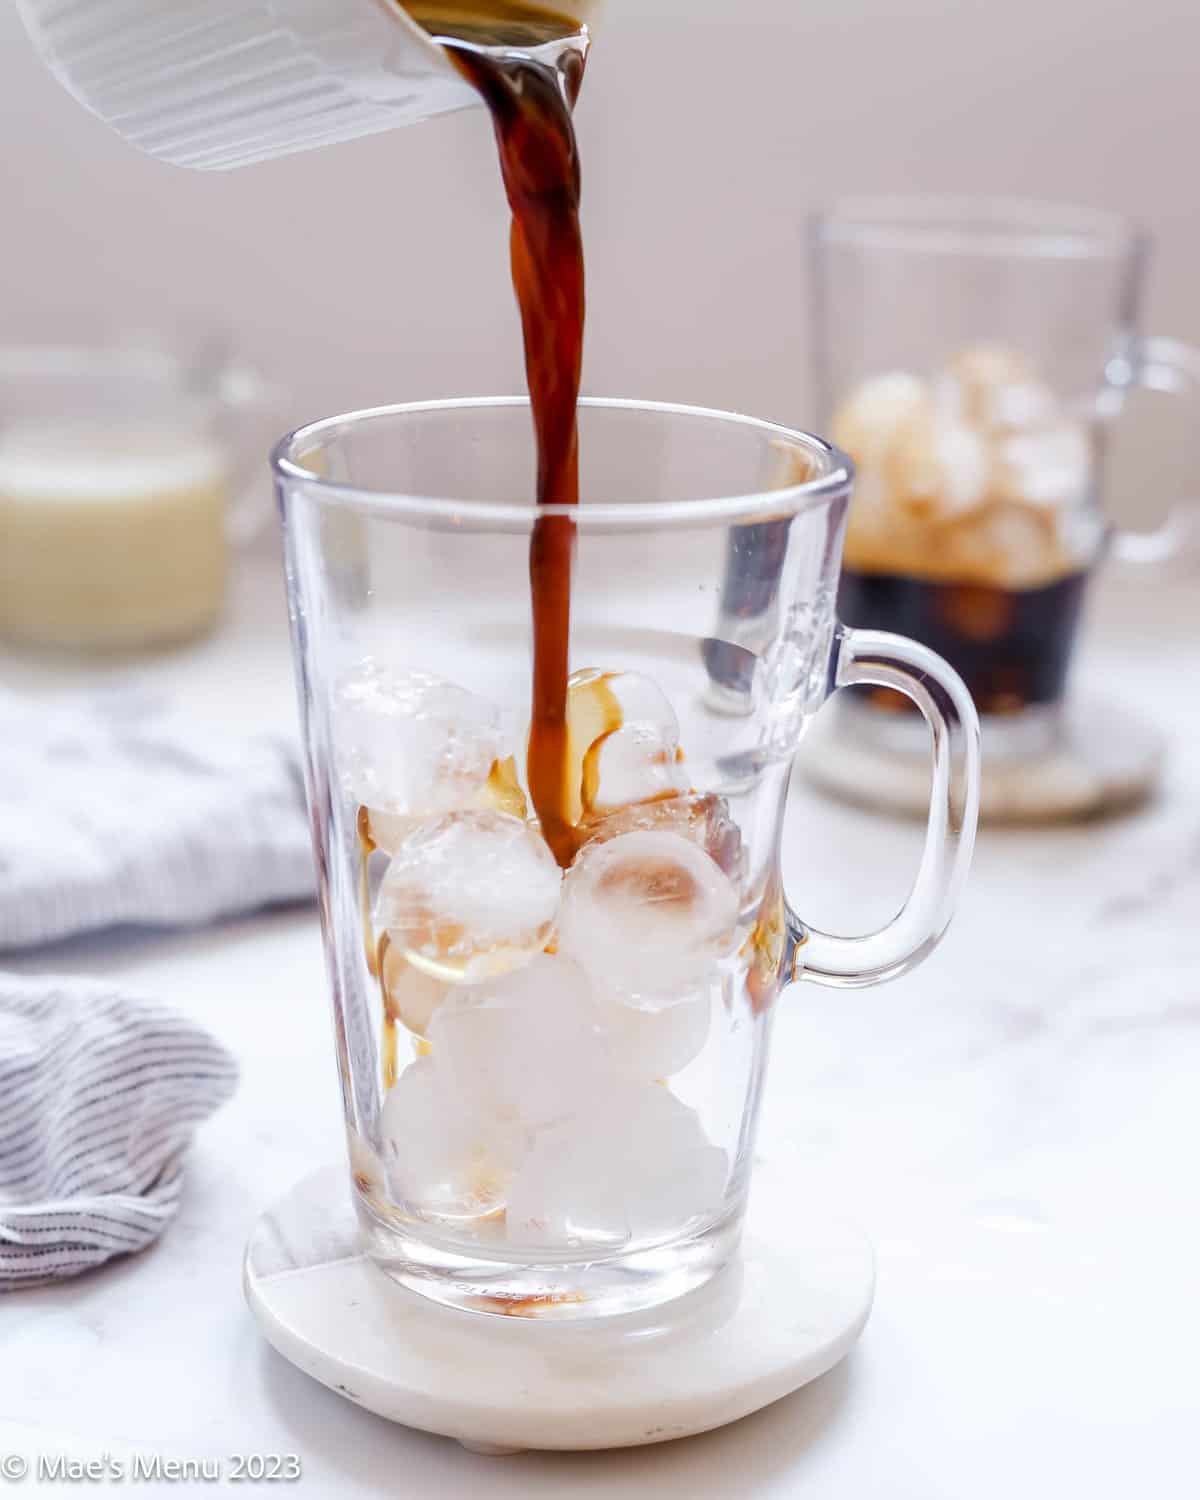 Pouring a shot of espresso into a glass of ice.